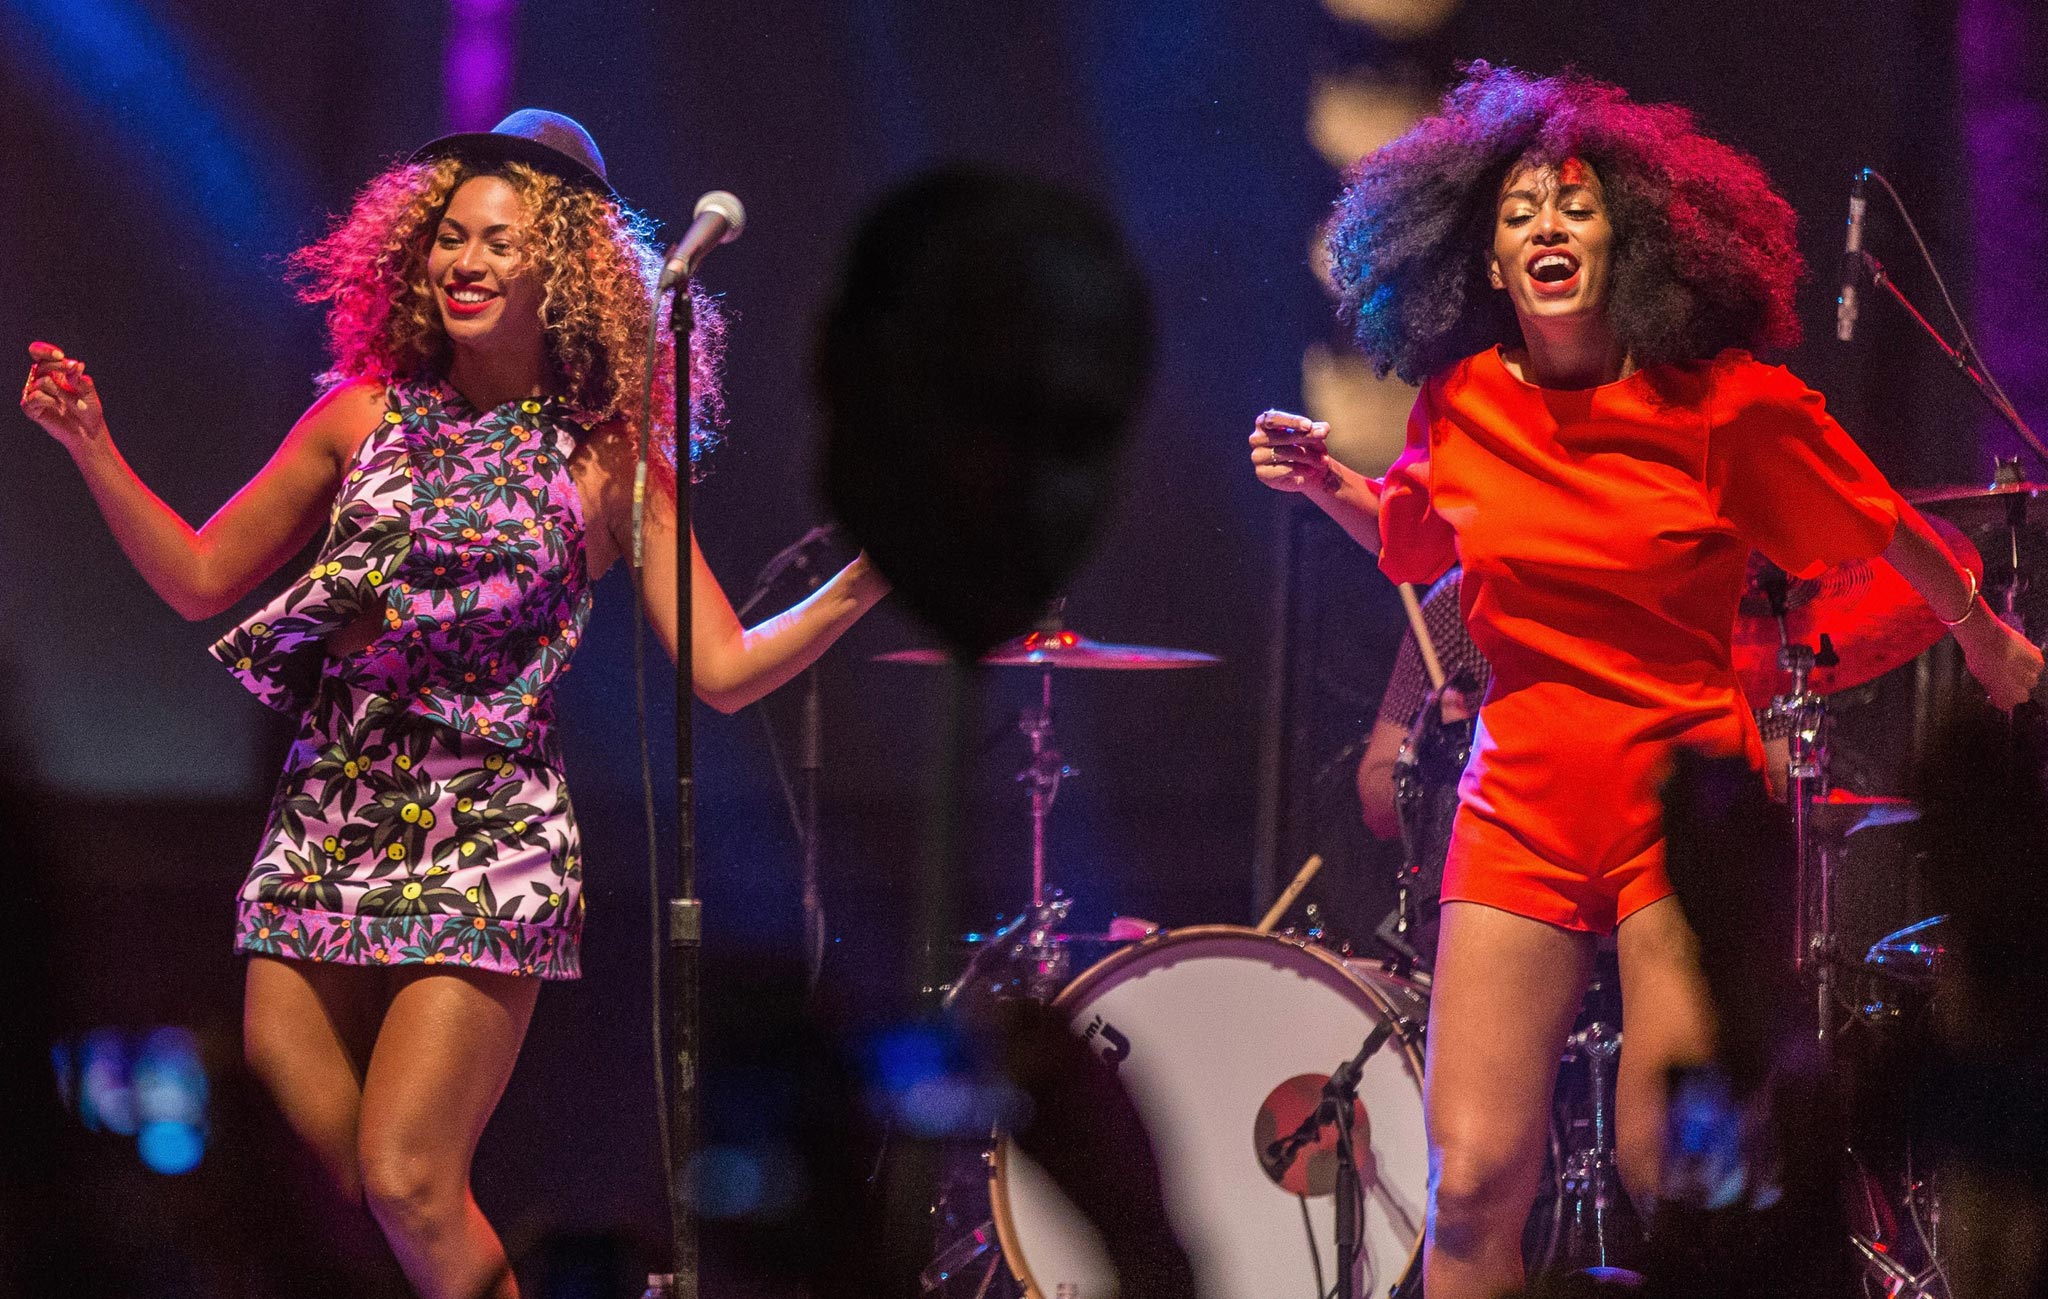 Singer Beyonce performs with her sister Solange onstage on Day 2 of the 2014 Coachella Valley Music & Arts Festival